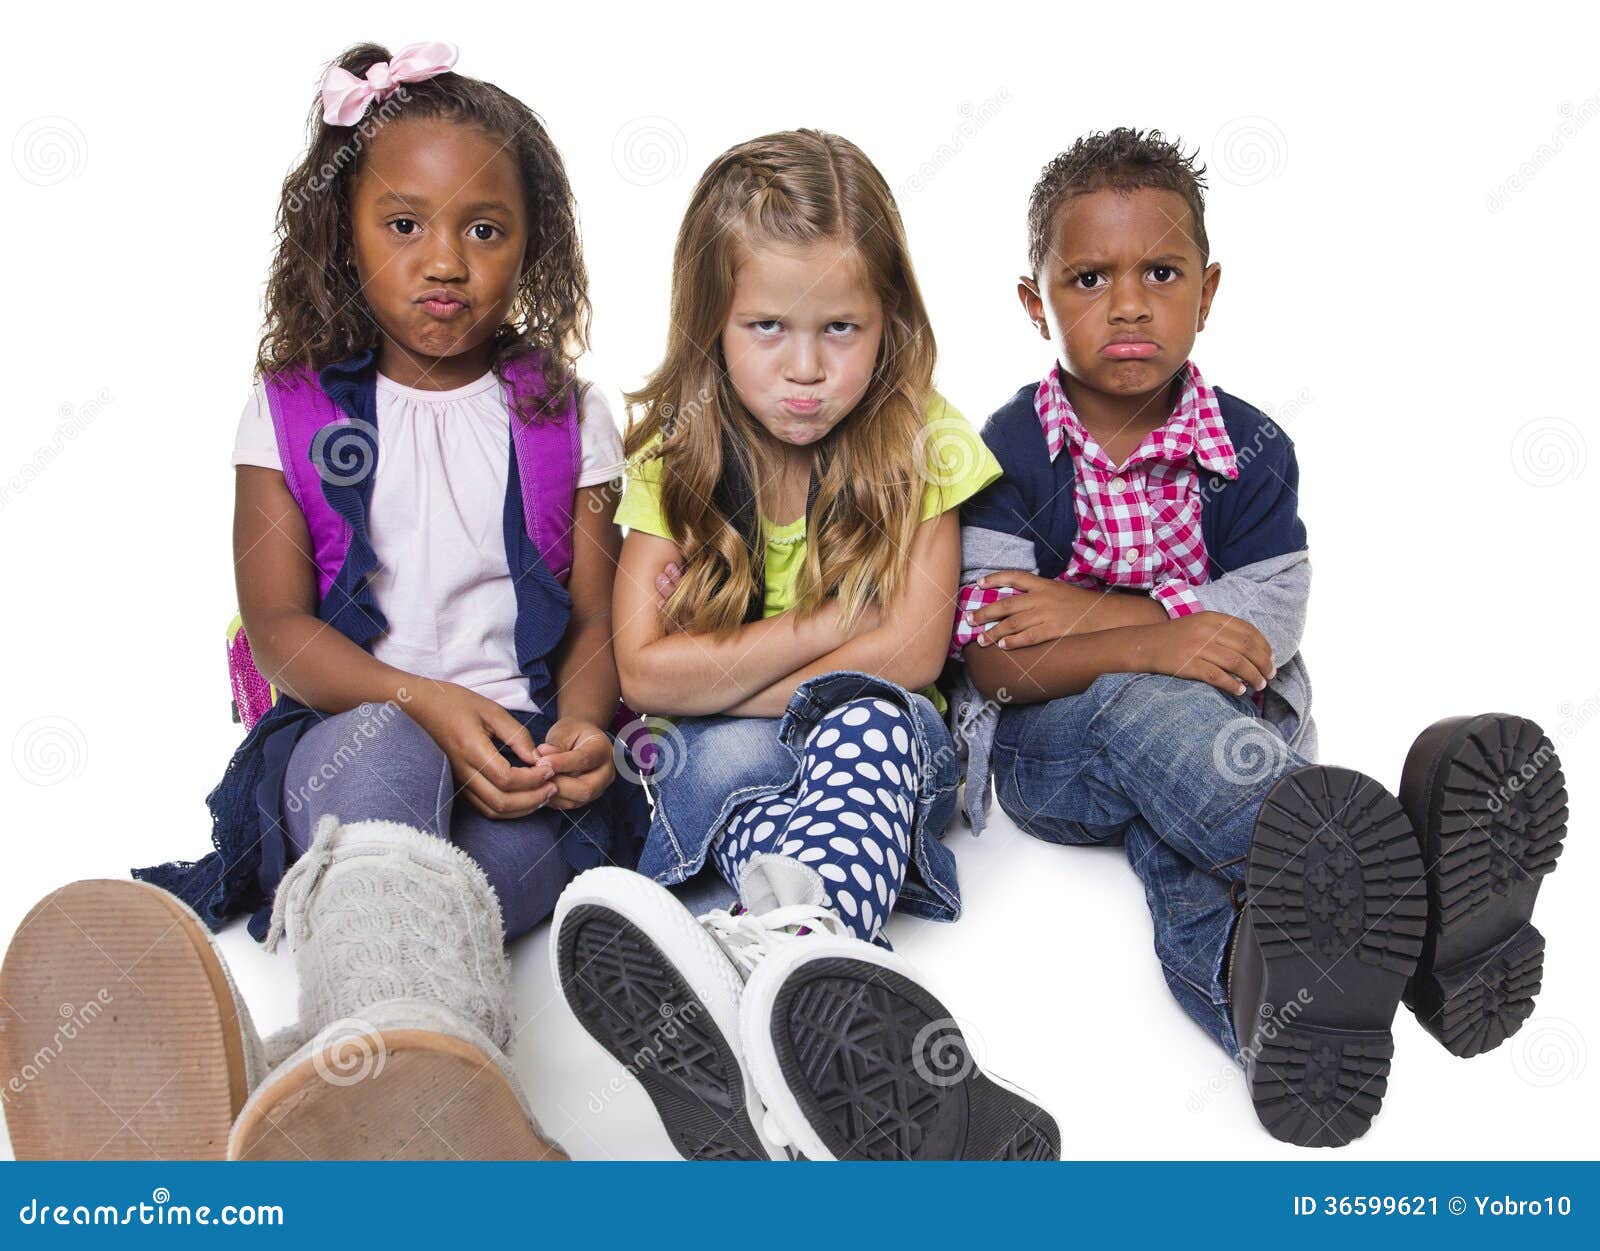 group of unhappy and upset kids